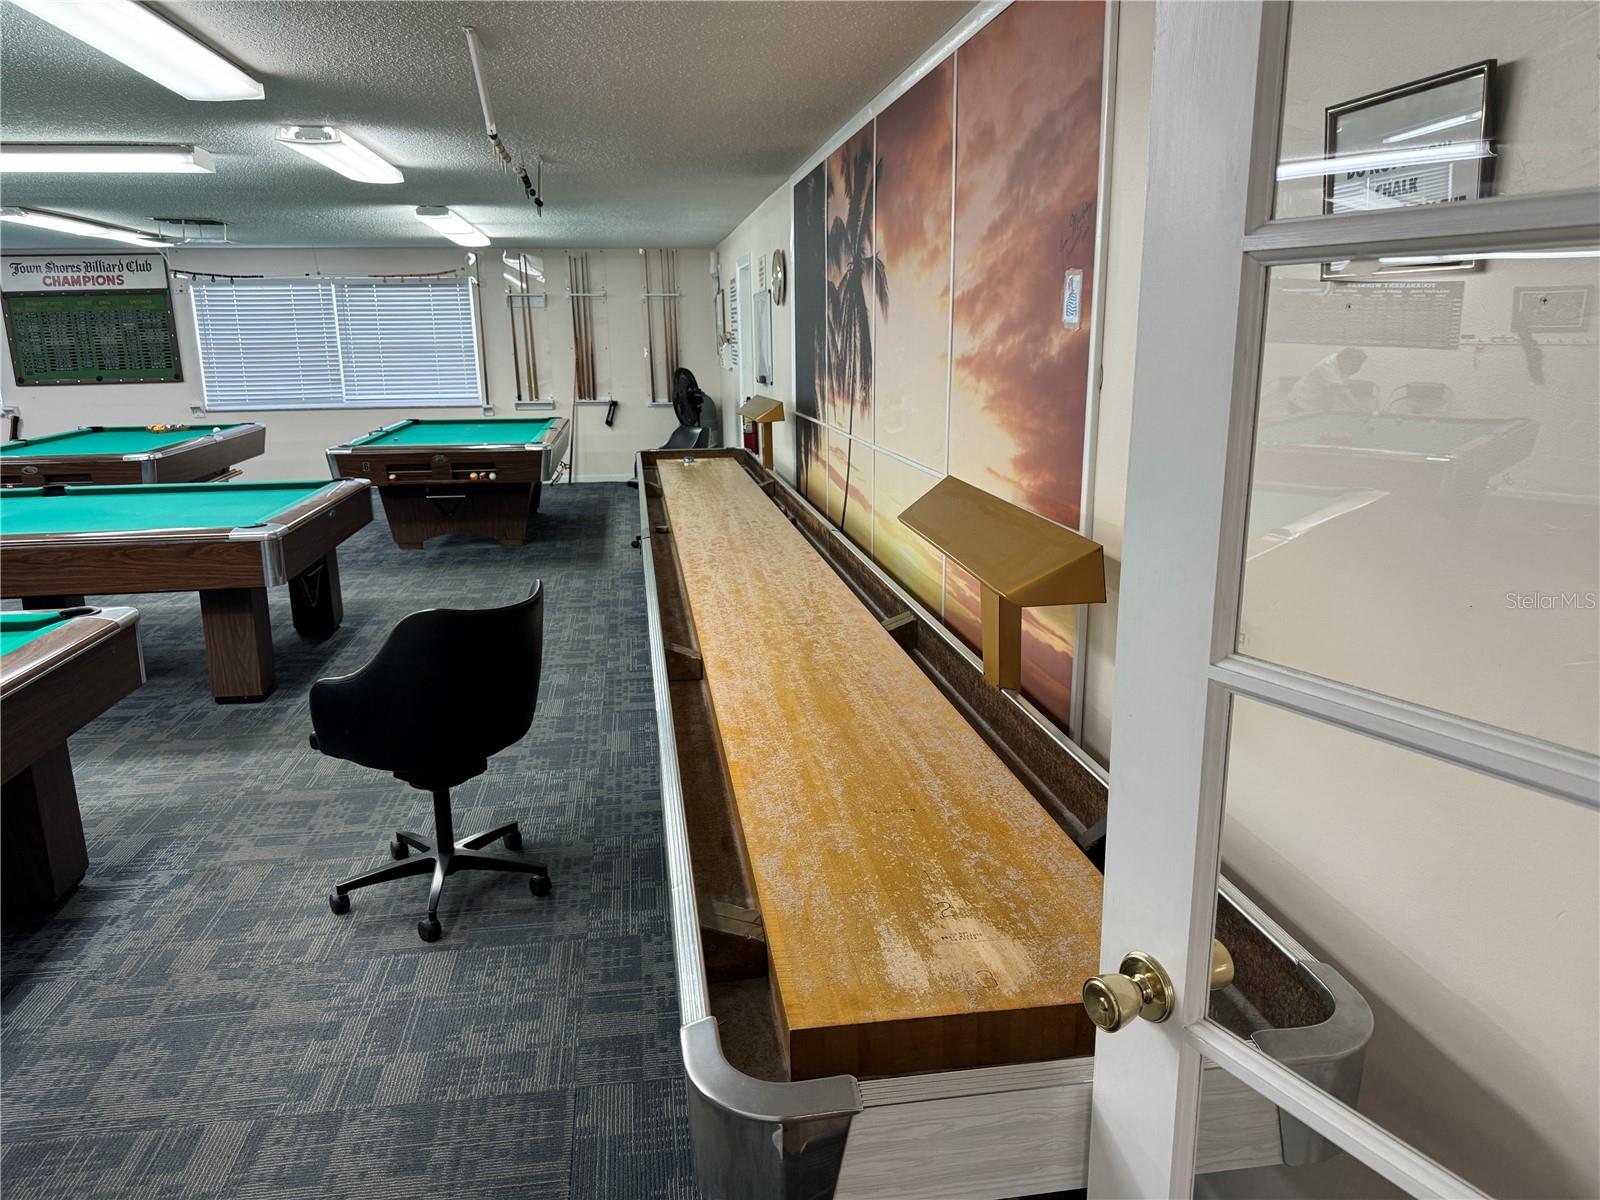 There's always time for a quick game of indoor shuffleboard